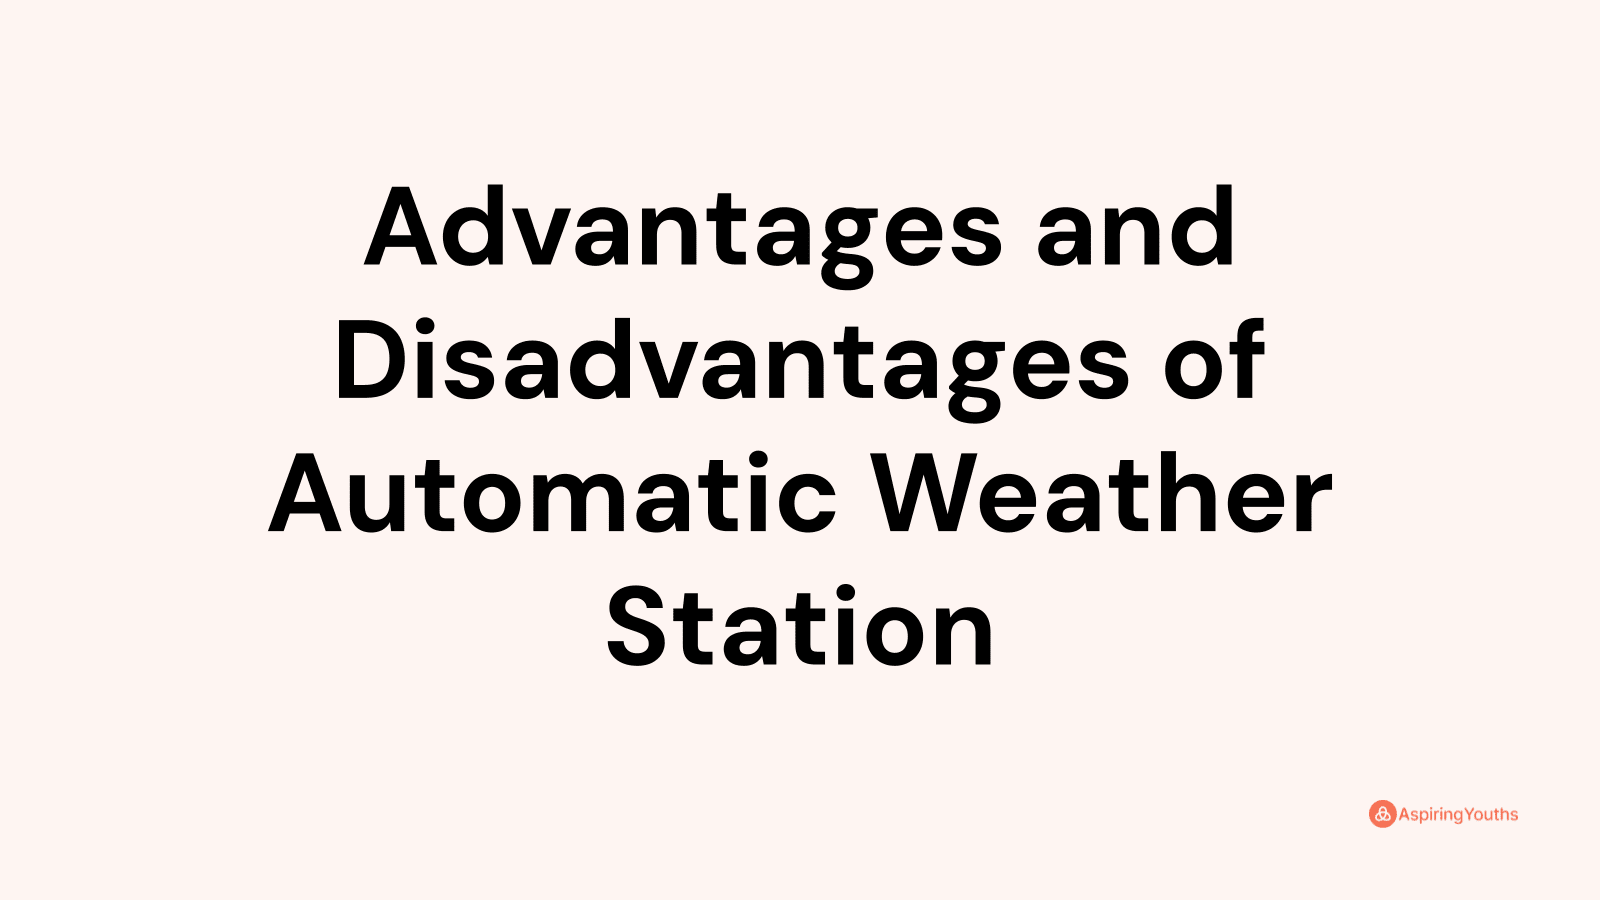 Advantages and disadvantages of Automatic Weather Station